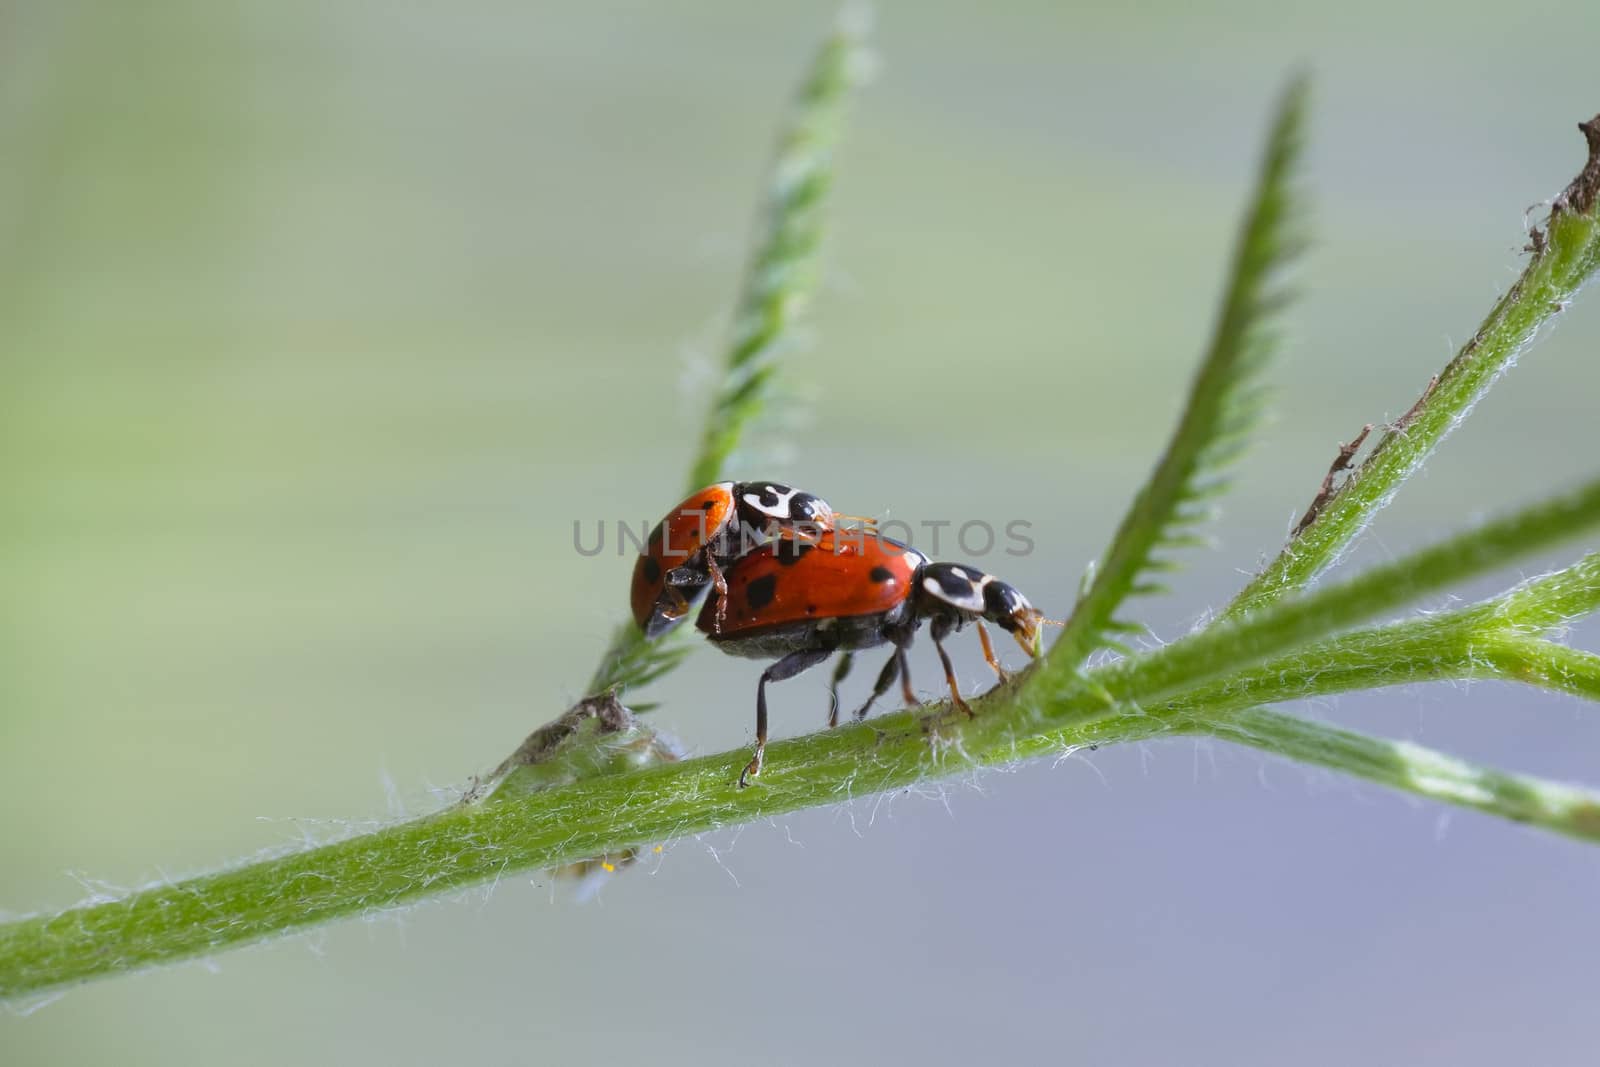 Two ladybugs mating on grass leaf in garden 